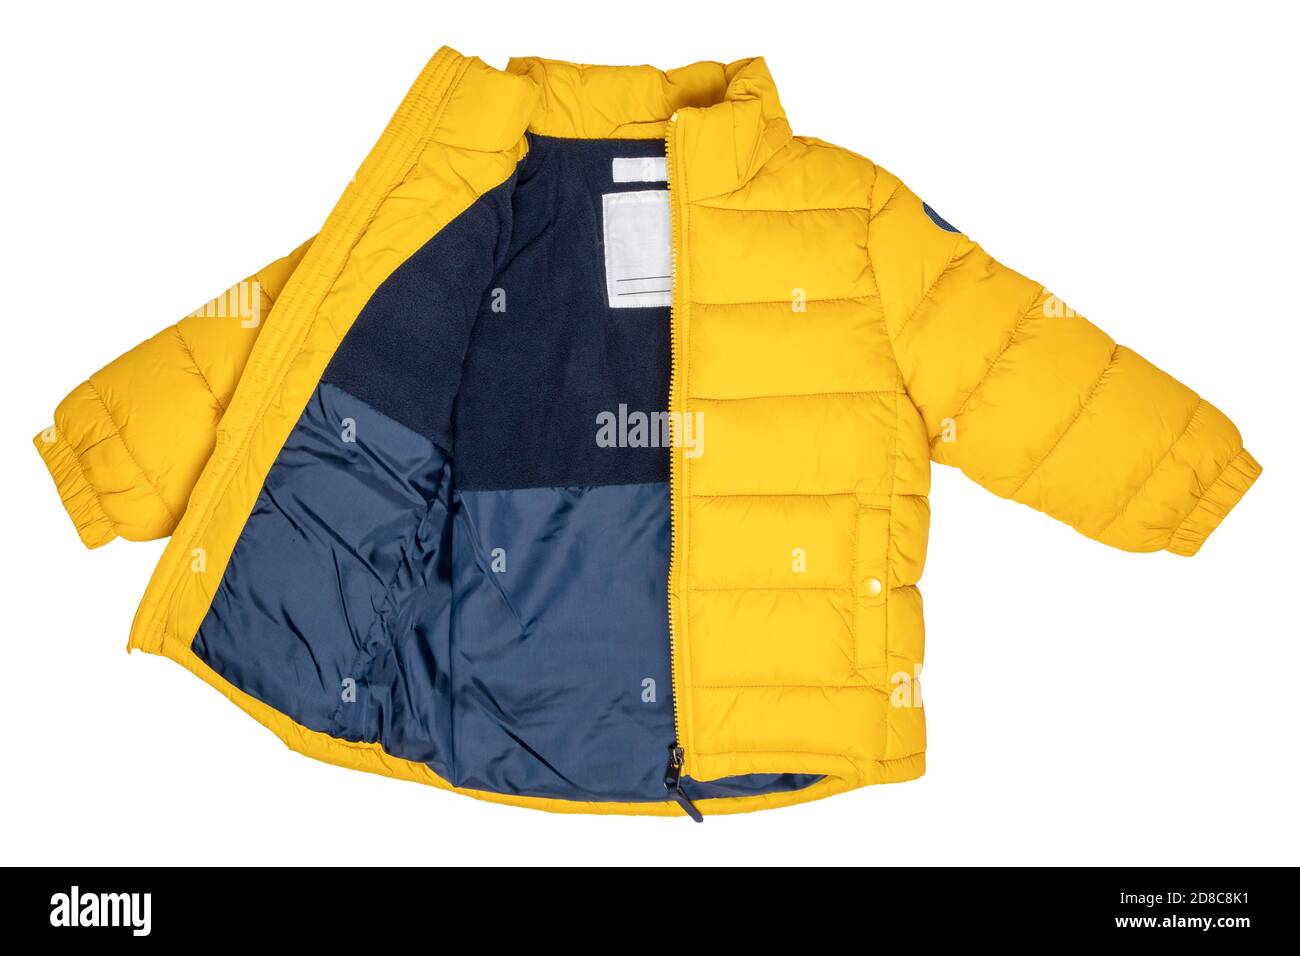 Winter jackets for children. Stylish, yellow, warm down jacket for children with removable hood, isolated on a white background. Winter fashion. Stock Photo